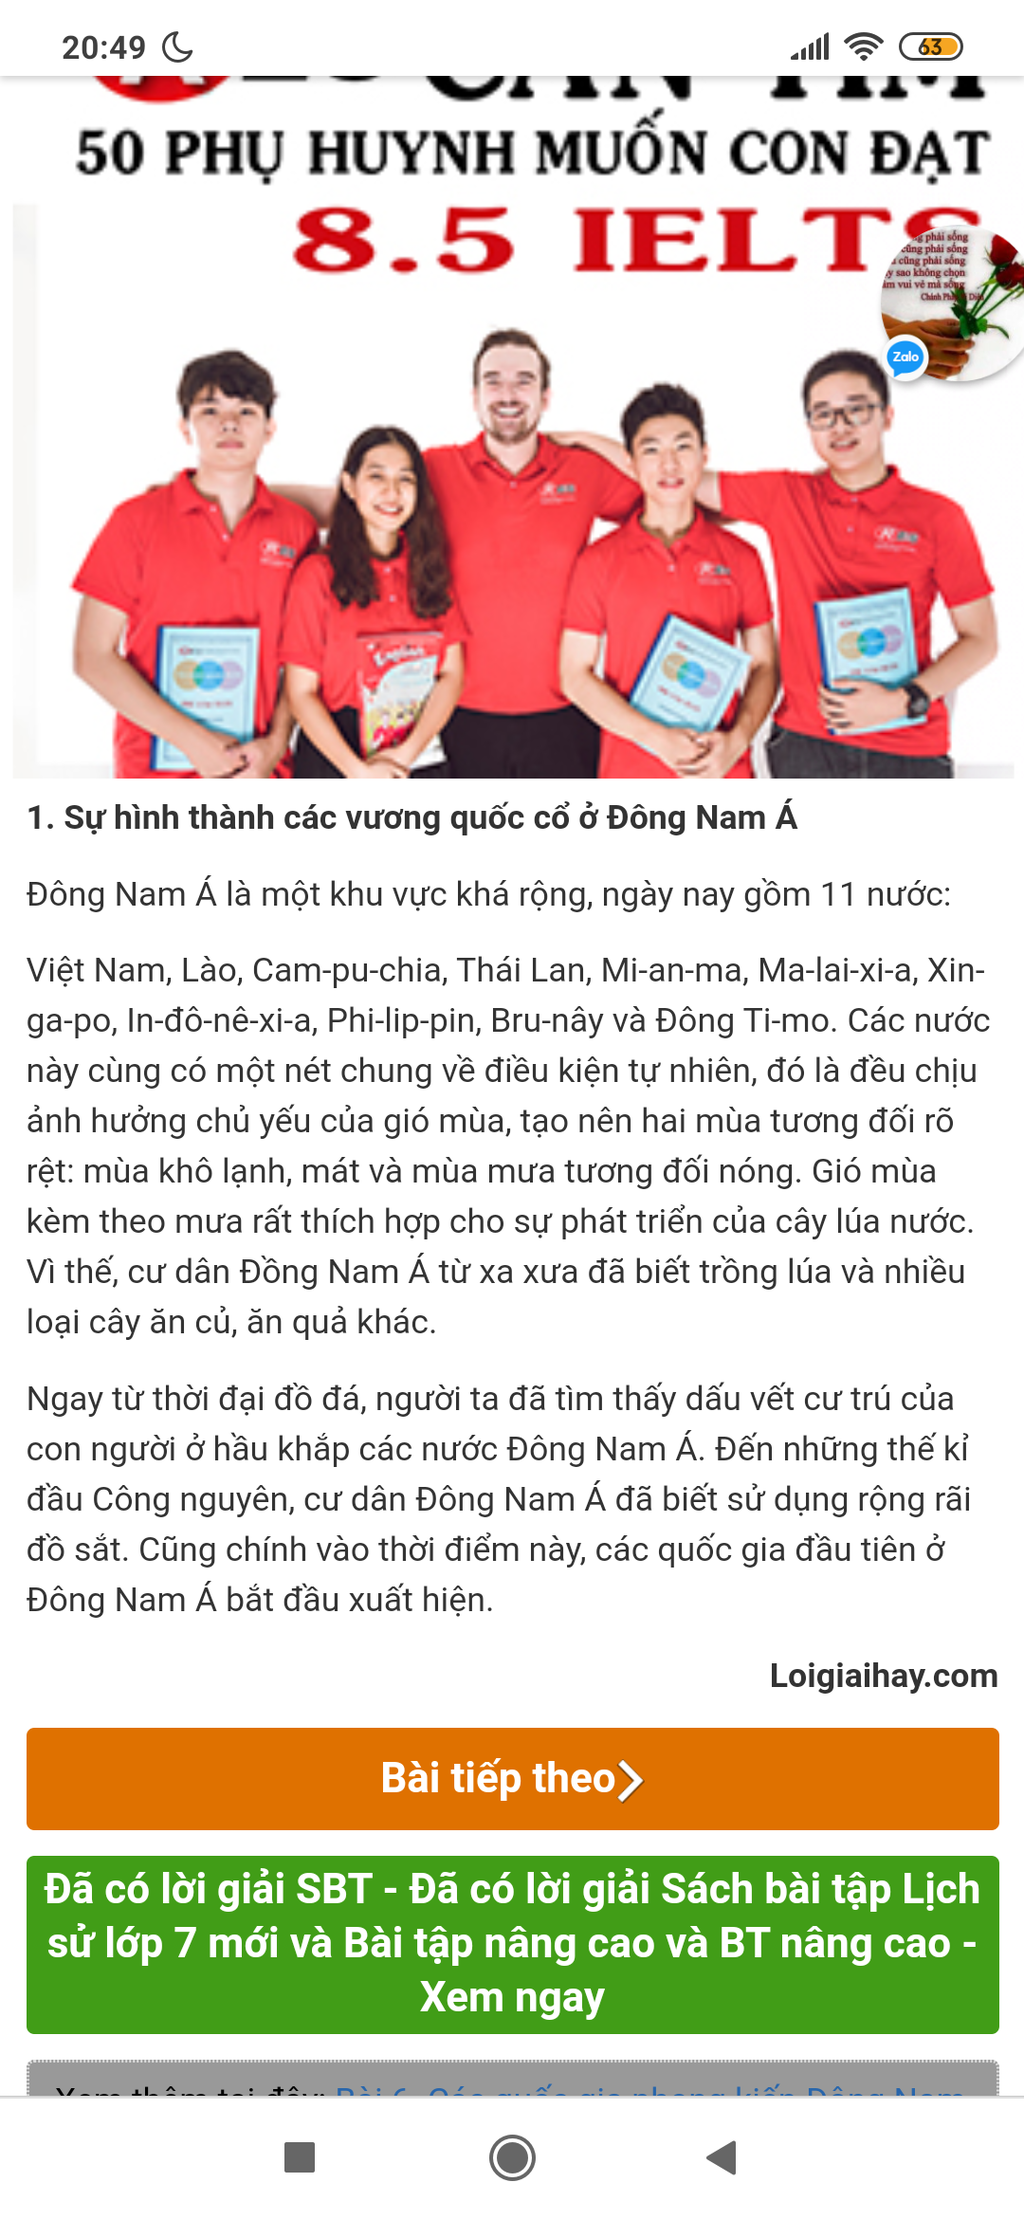 cac-quoc-gia-dong-nam-a-co-duoc-hinh-thanh-nhu-the-nao